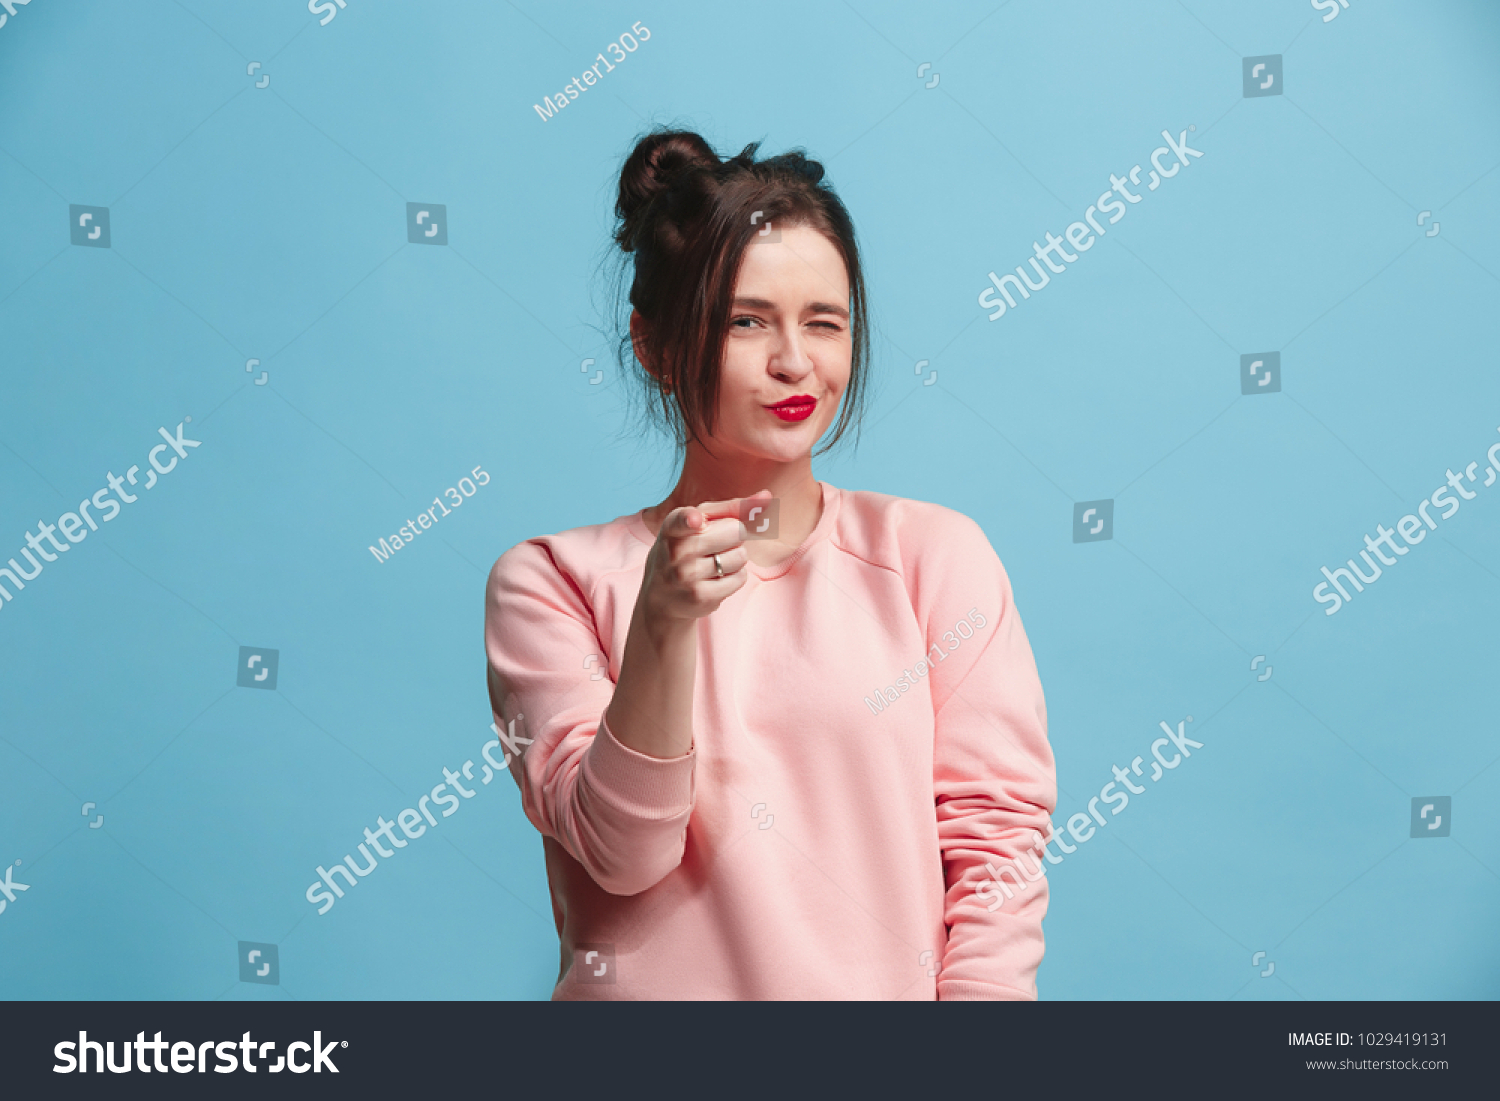 I choose you and order. The smiling business woman point you, want you, half length closeup portrait on blue studio background. The human emotions, facial expression concept. Front view. Trendy colors #1029419131